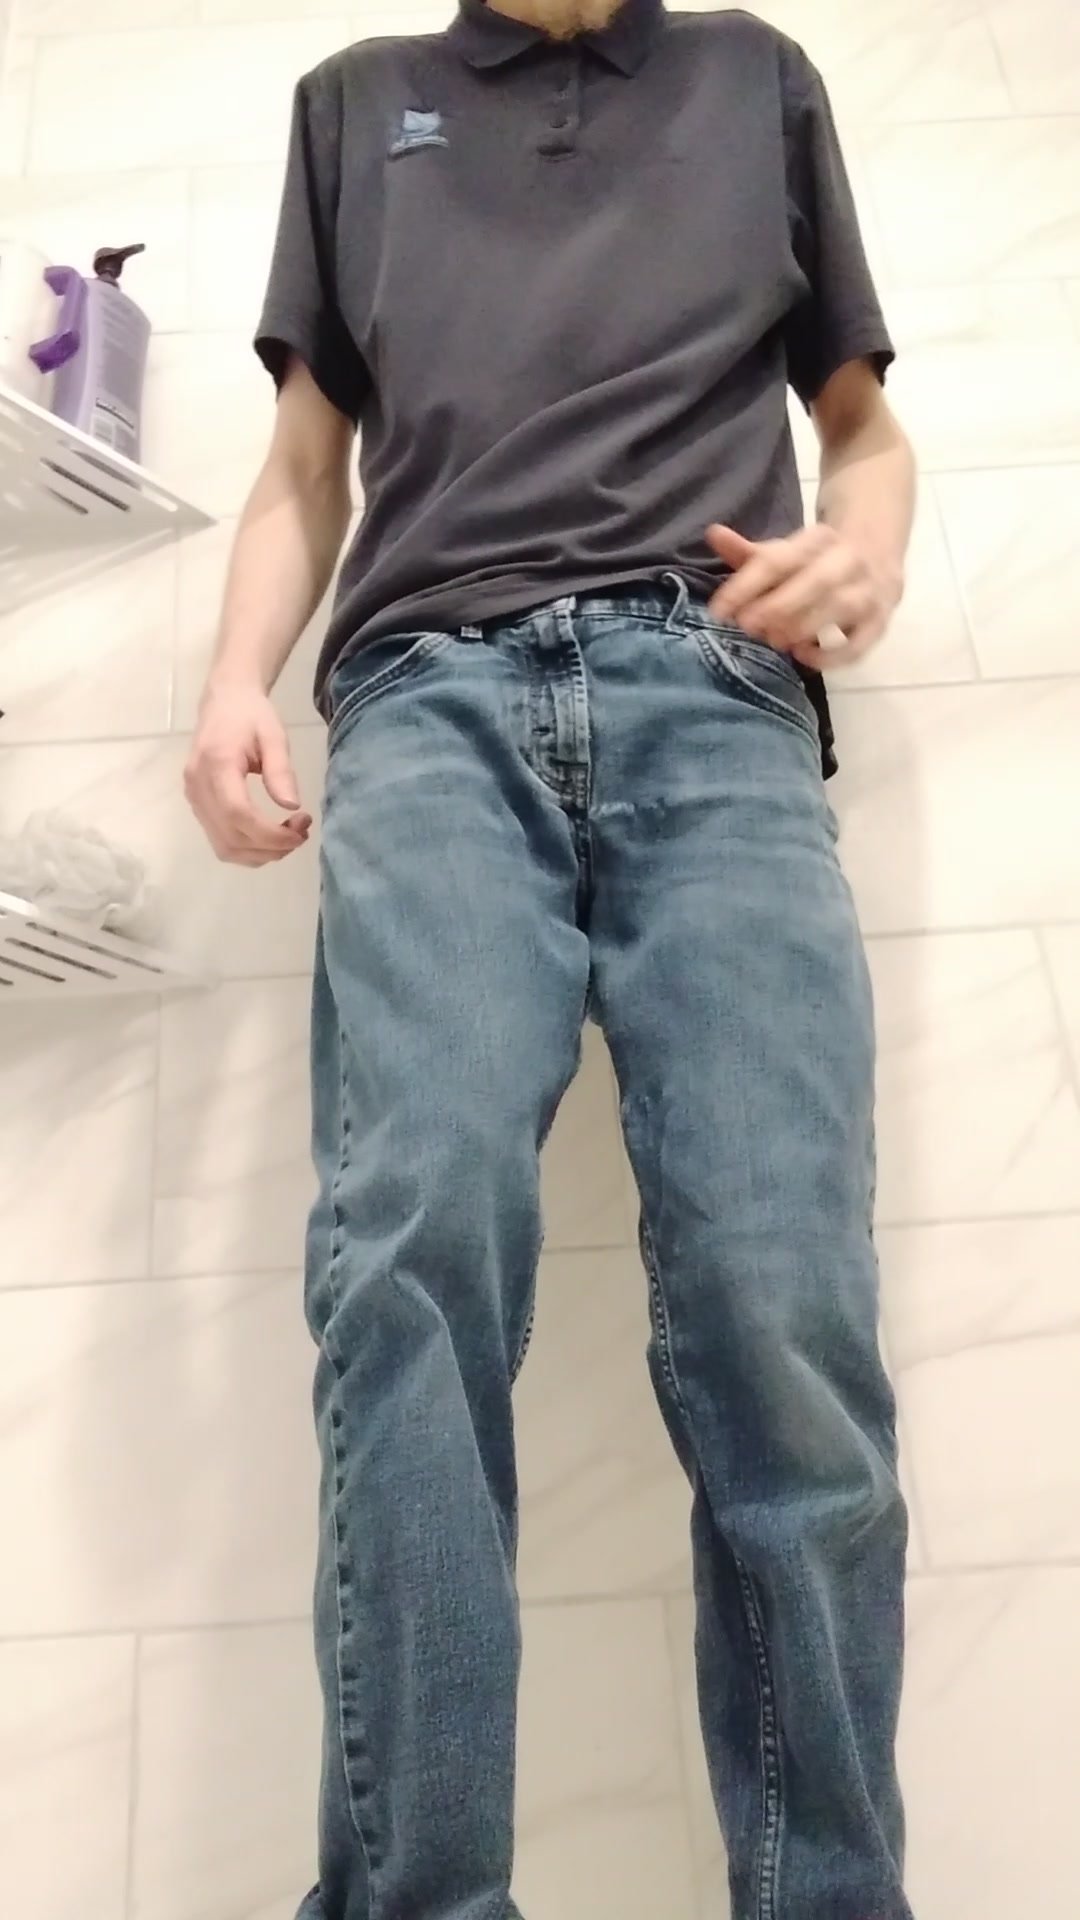 Pissing in my work jeans